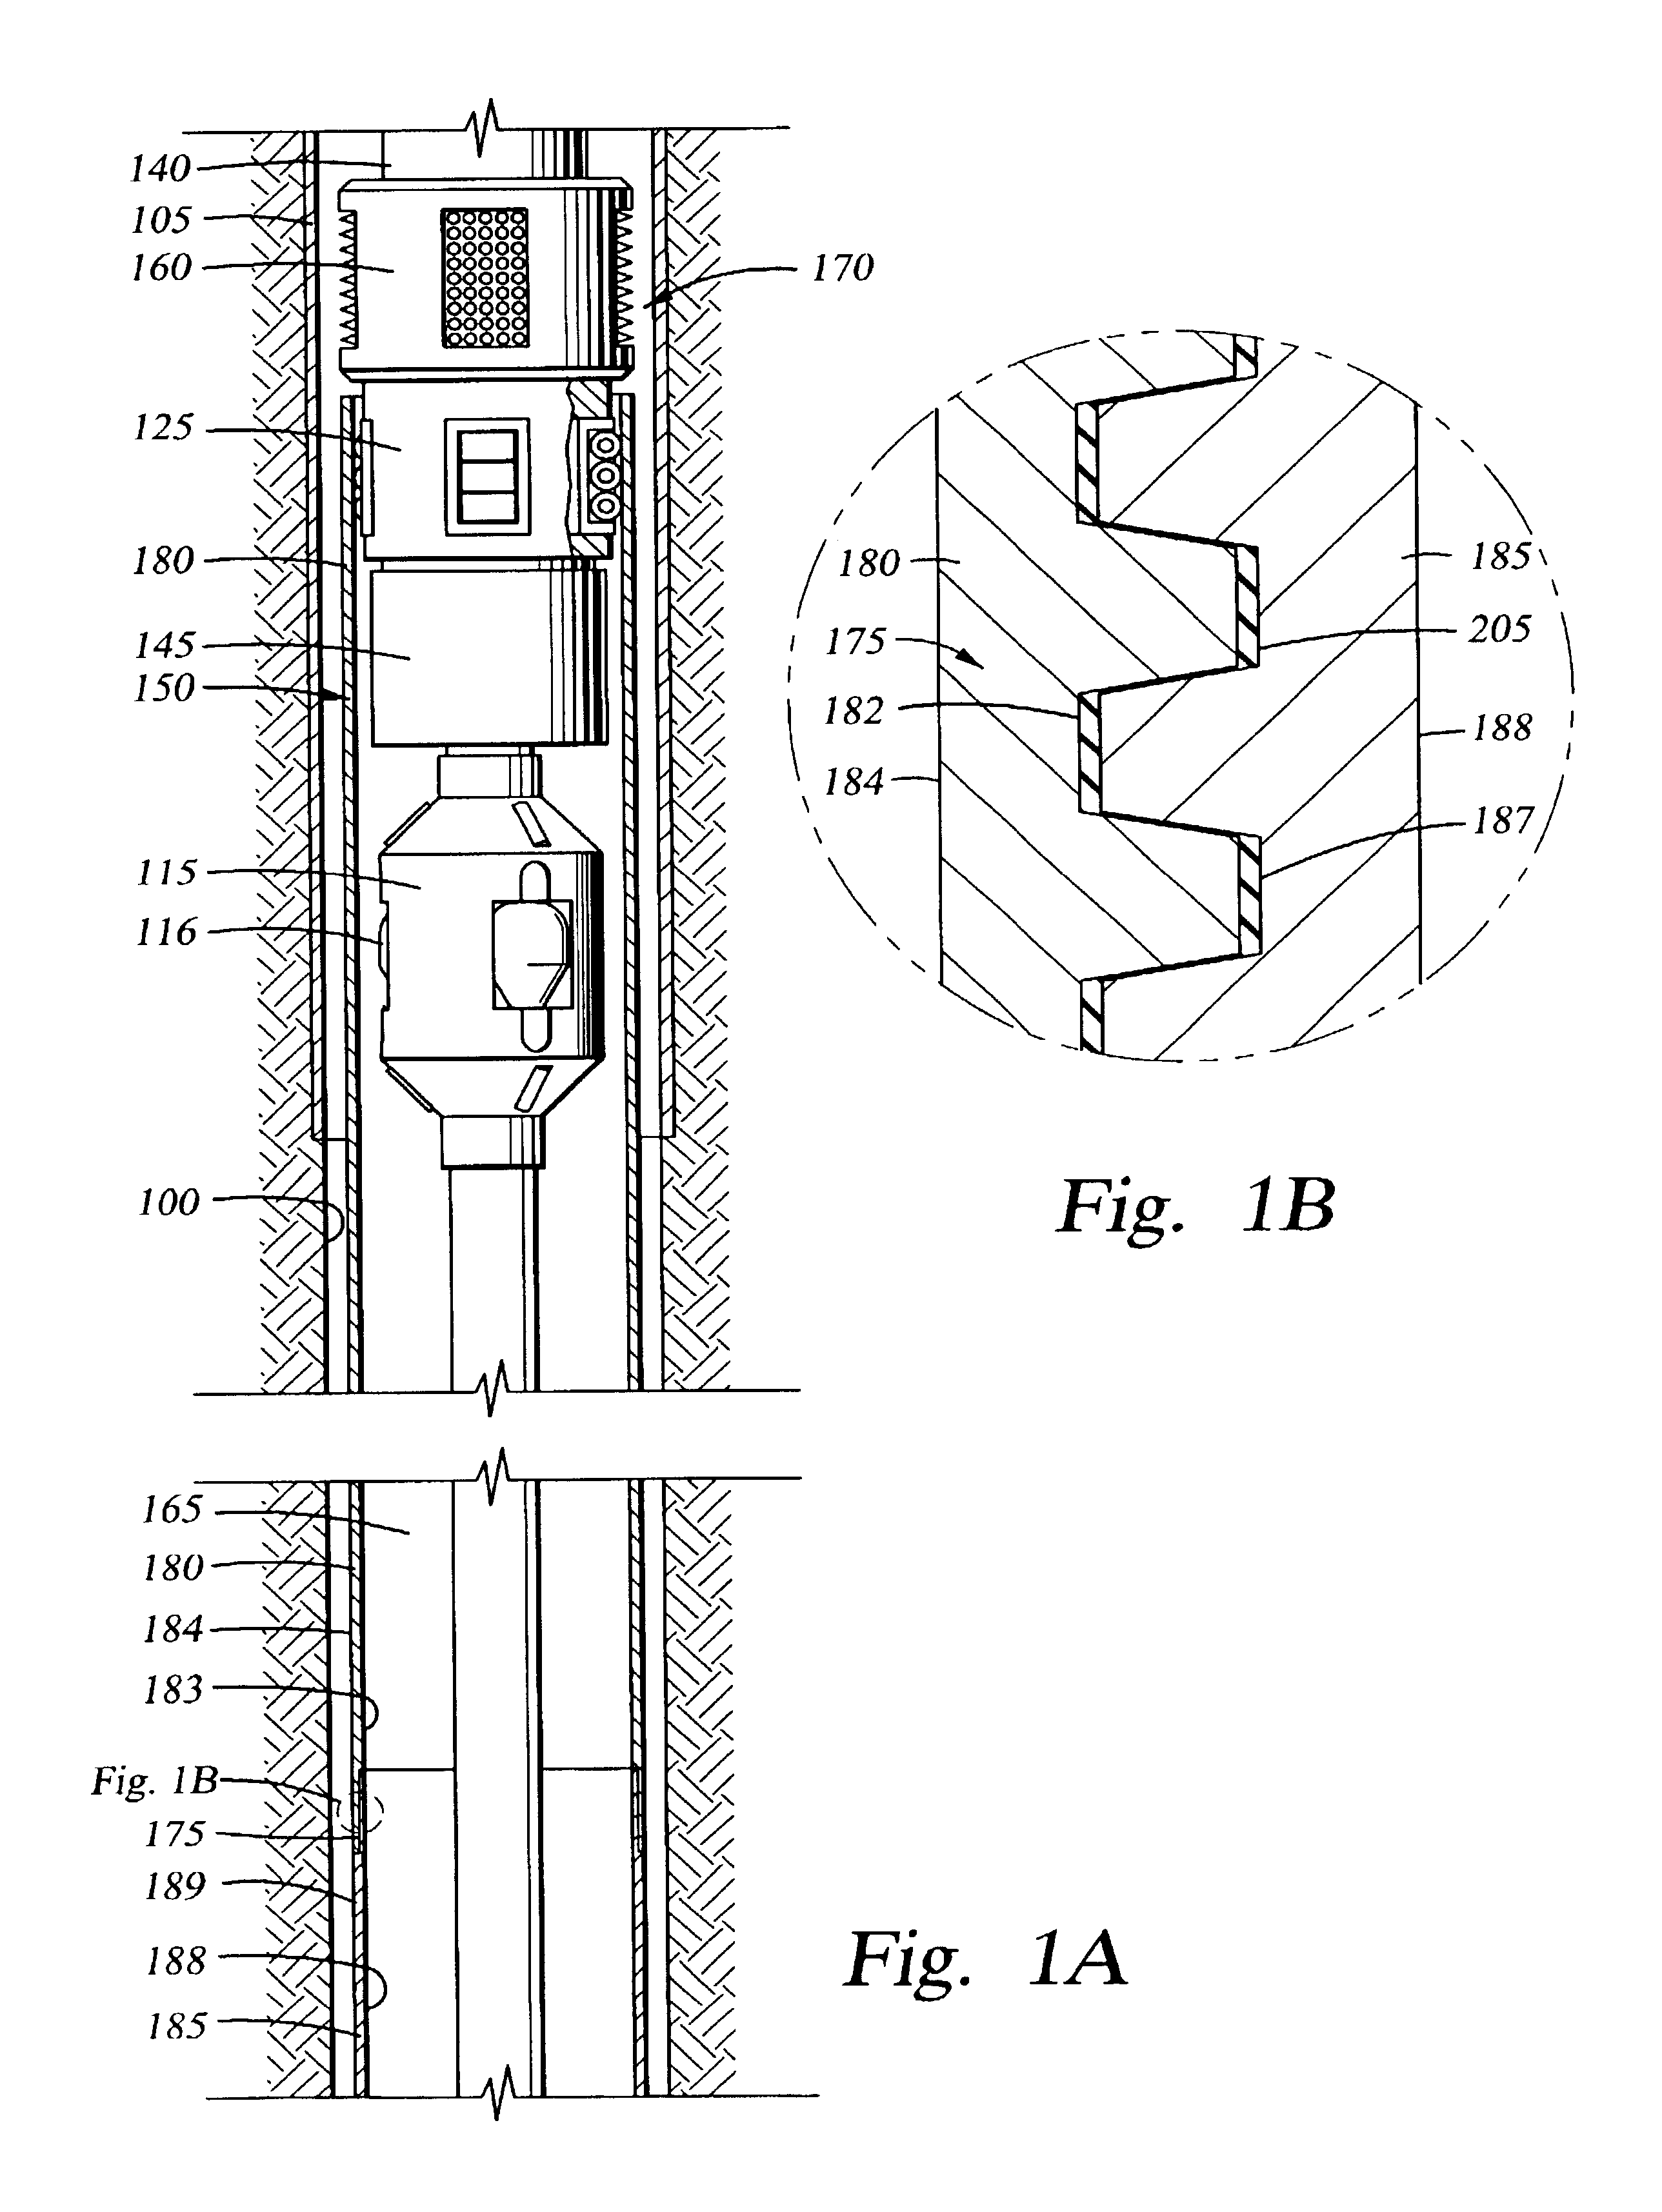 Expandable connection for use with a swelling elastomer